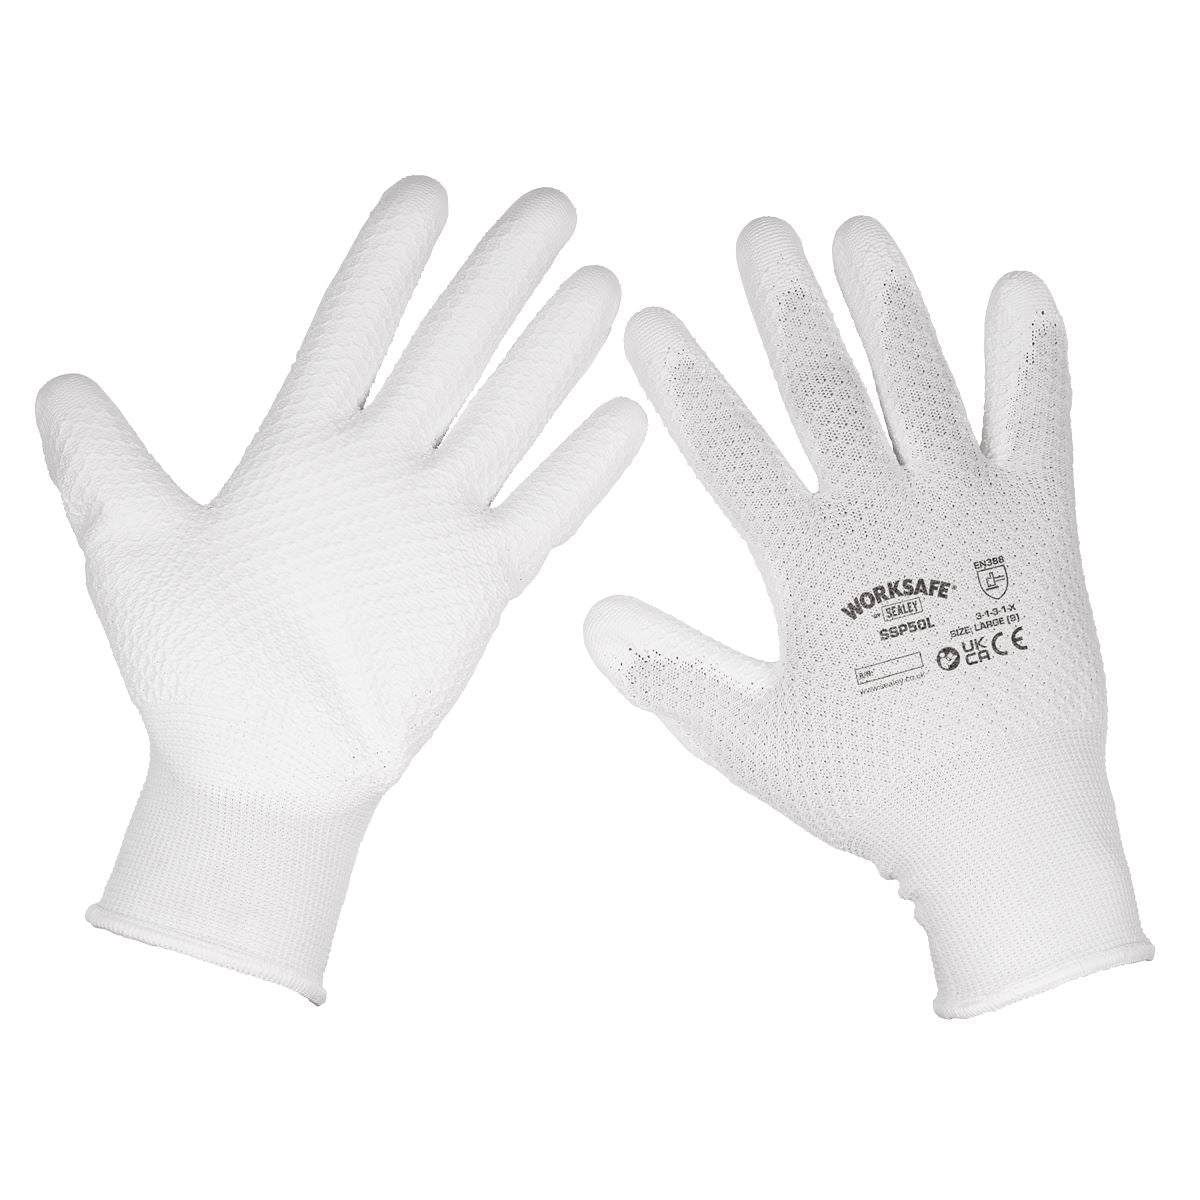 Worksafe by Sealey White Precision Grip Gloves - (Large) - Box of 120 Pairs